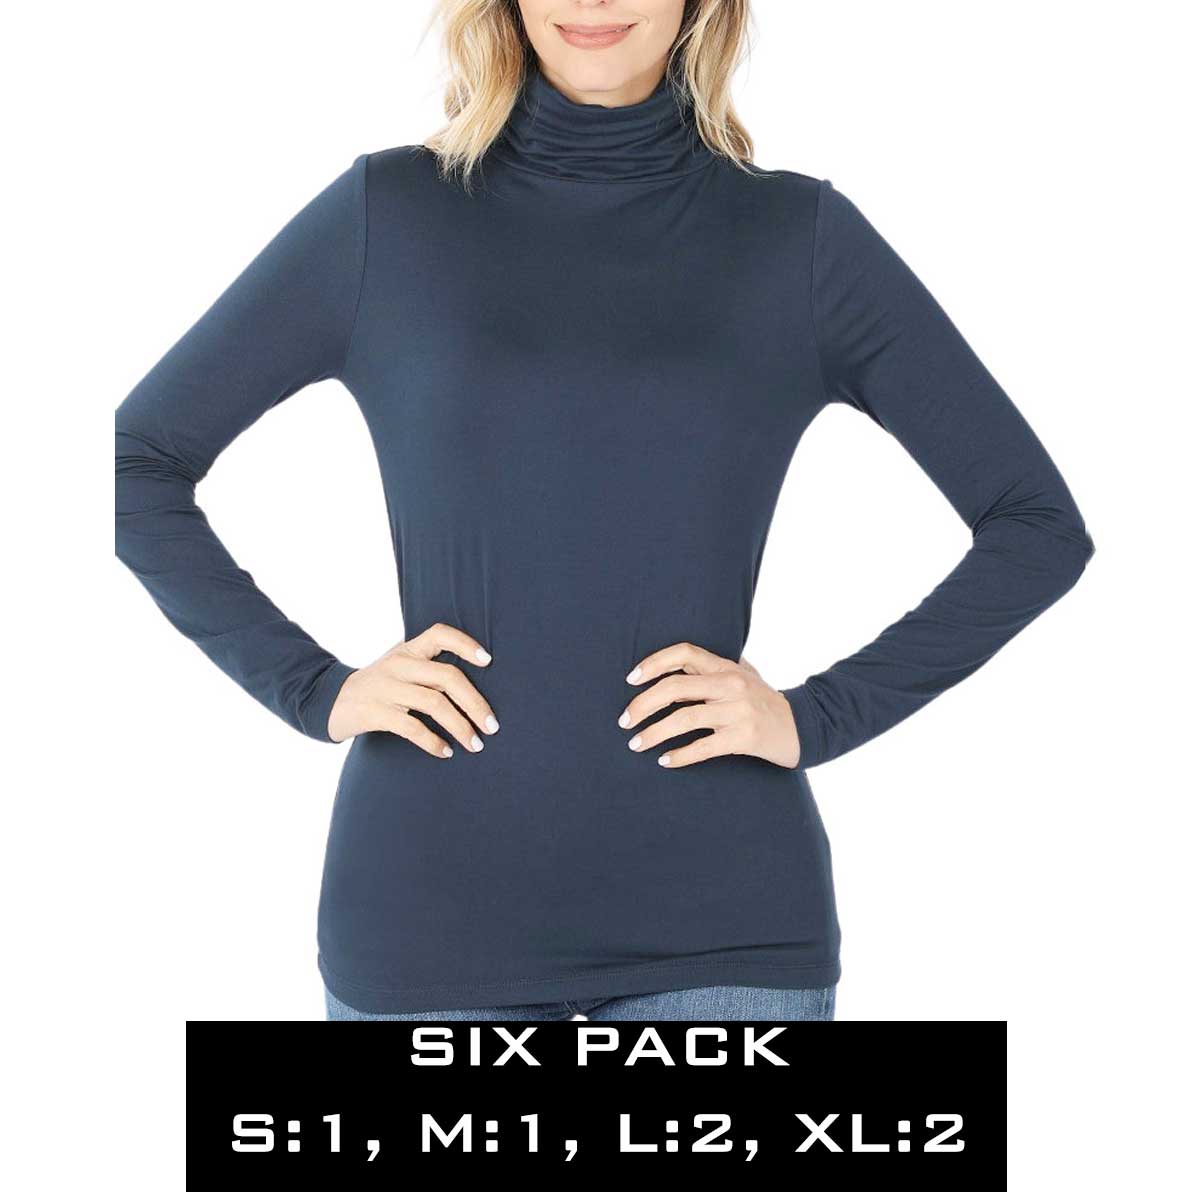  MIDNIGHT (SIX PACK) Ruched Turtleneck Long Sleeve 2055(1S,1M,2L,2XL)